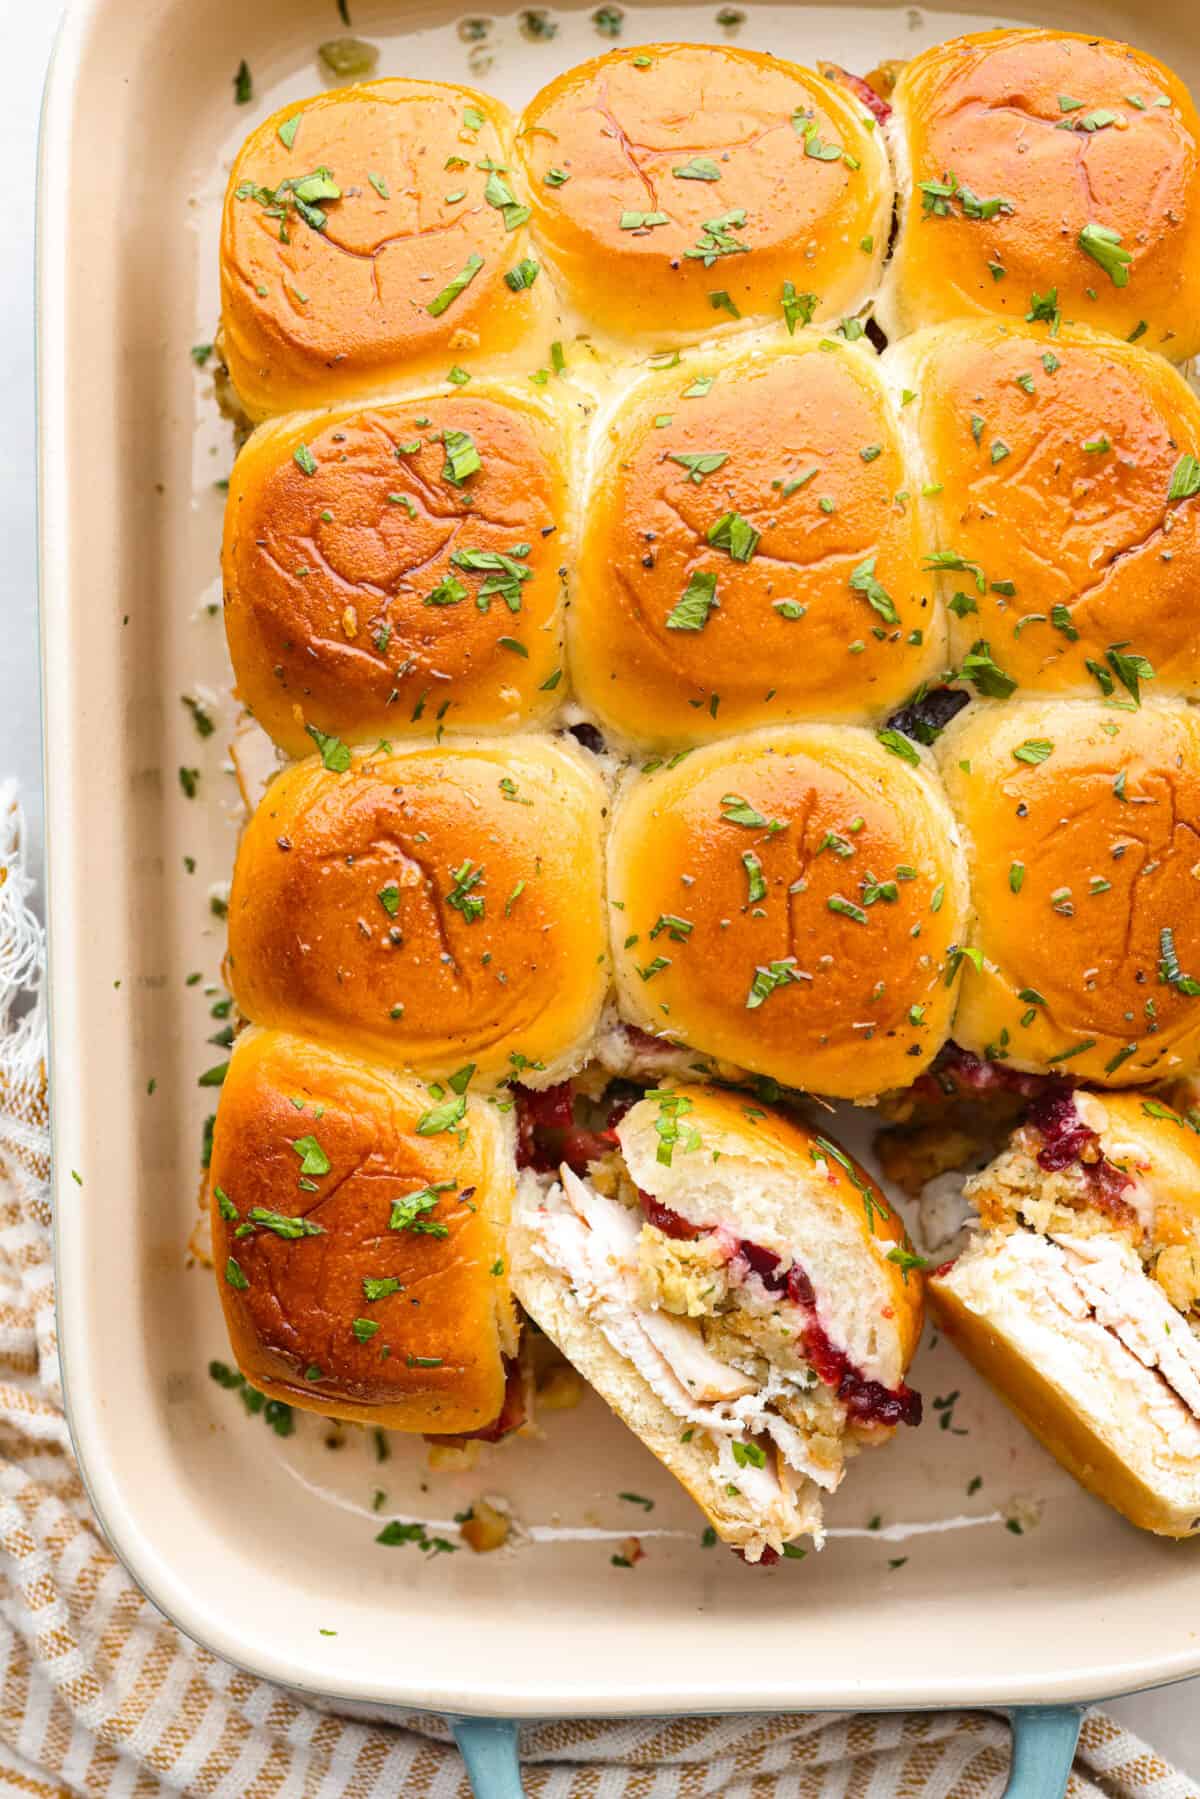 Top-down view of turkey cranberry sliders in a baking dish. Two are turned on their side so the filling can be seen.